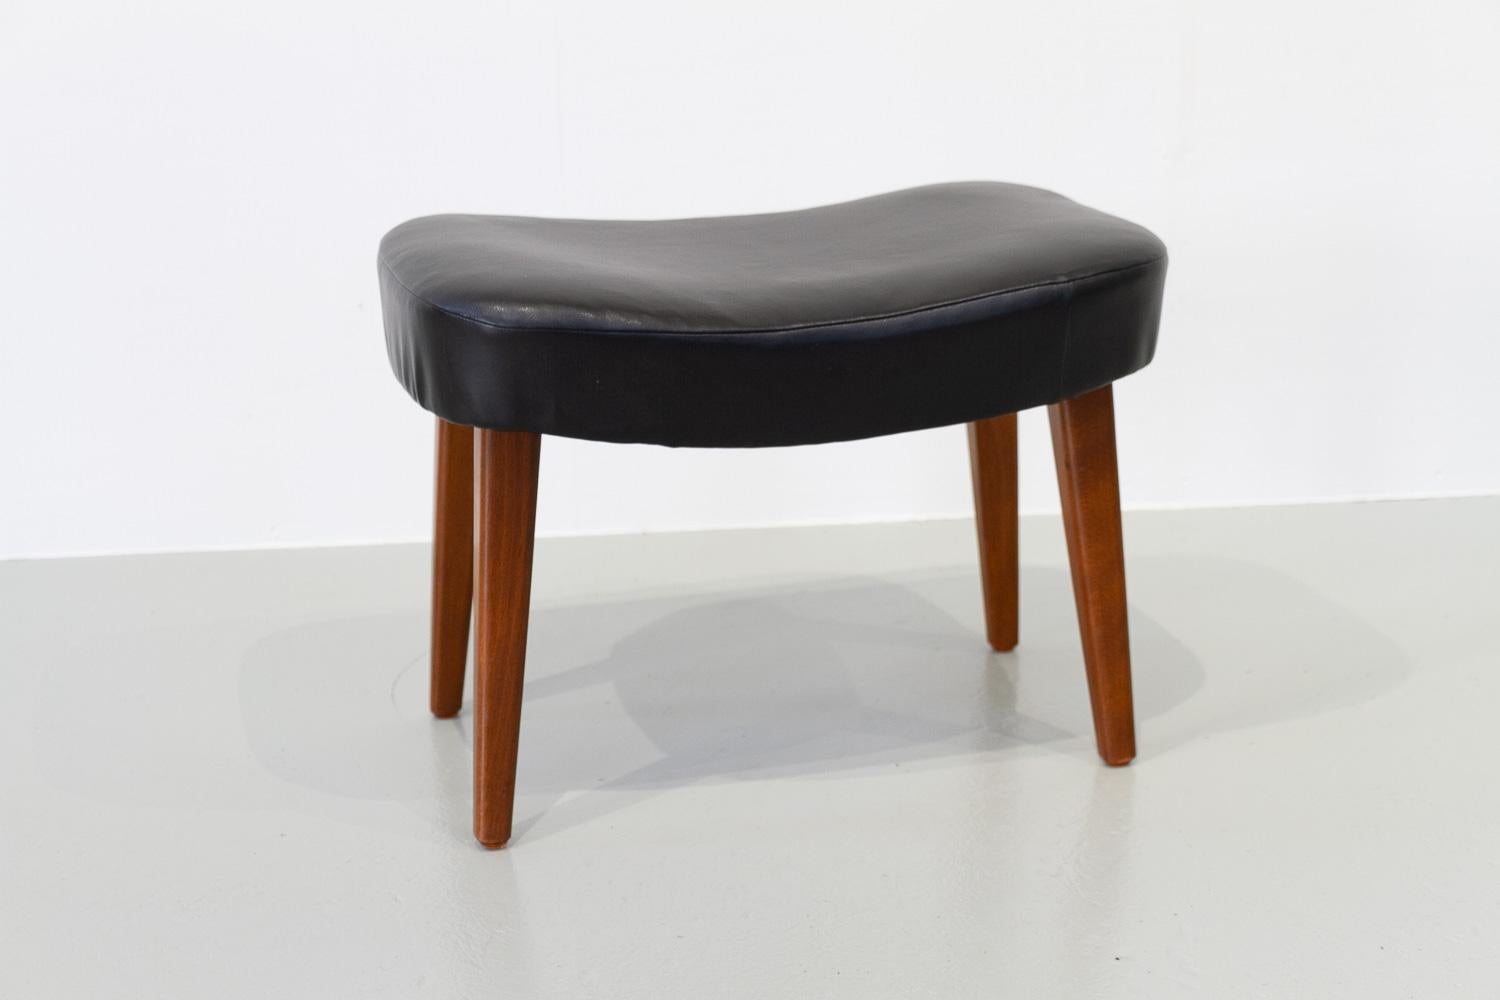 Danish Mid-Century Stool Model Pragh by Madsen & Schubell, 1950s.
Ottoman or foot stool designed by Dansih architects Ib Madsen and Acton Schubell and manufactured in their own workshop in Denmark in the 1950s.
It has later been re upholstered in